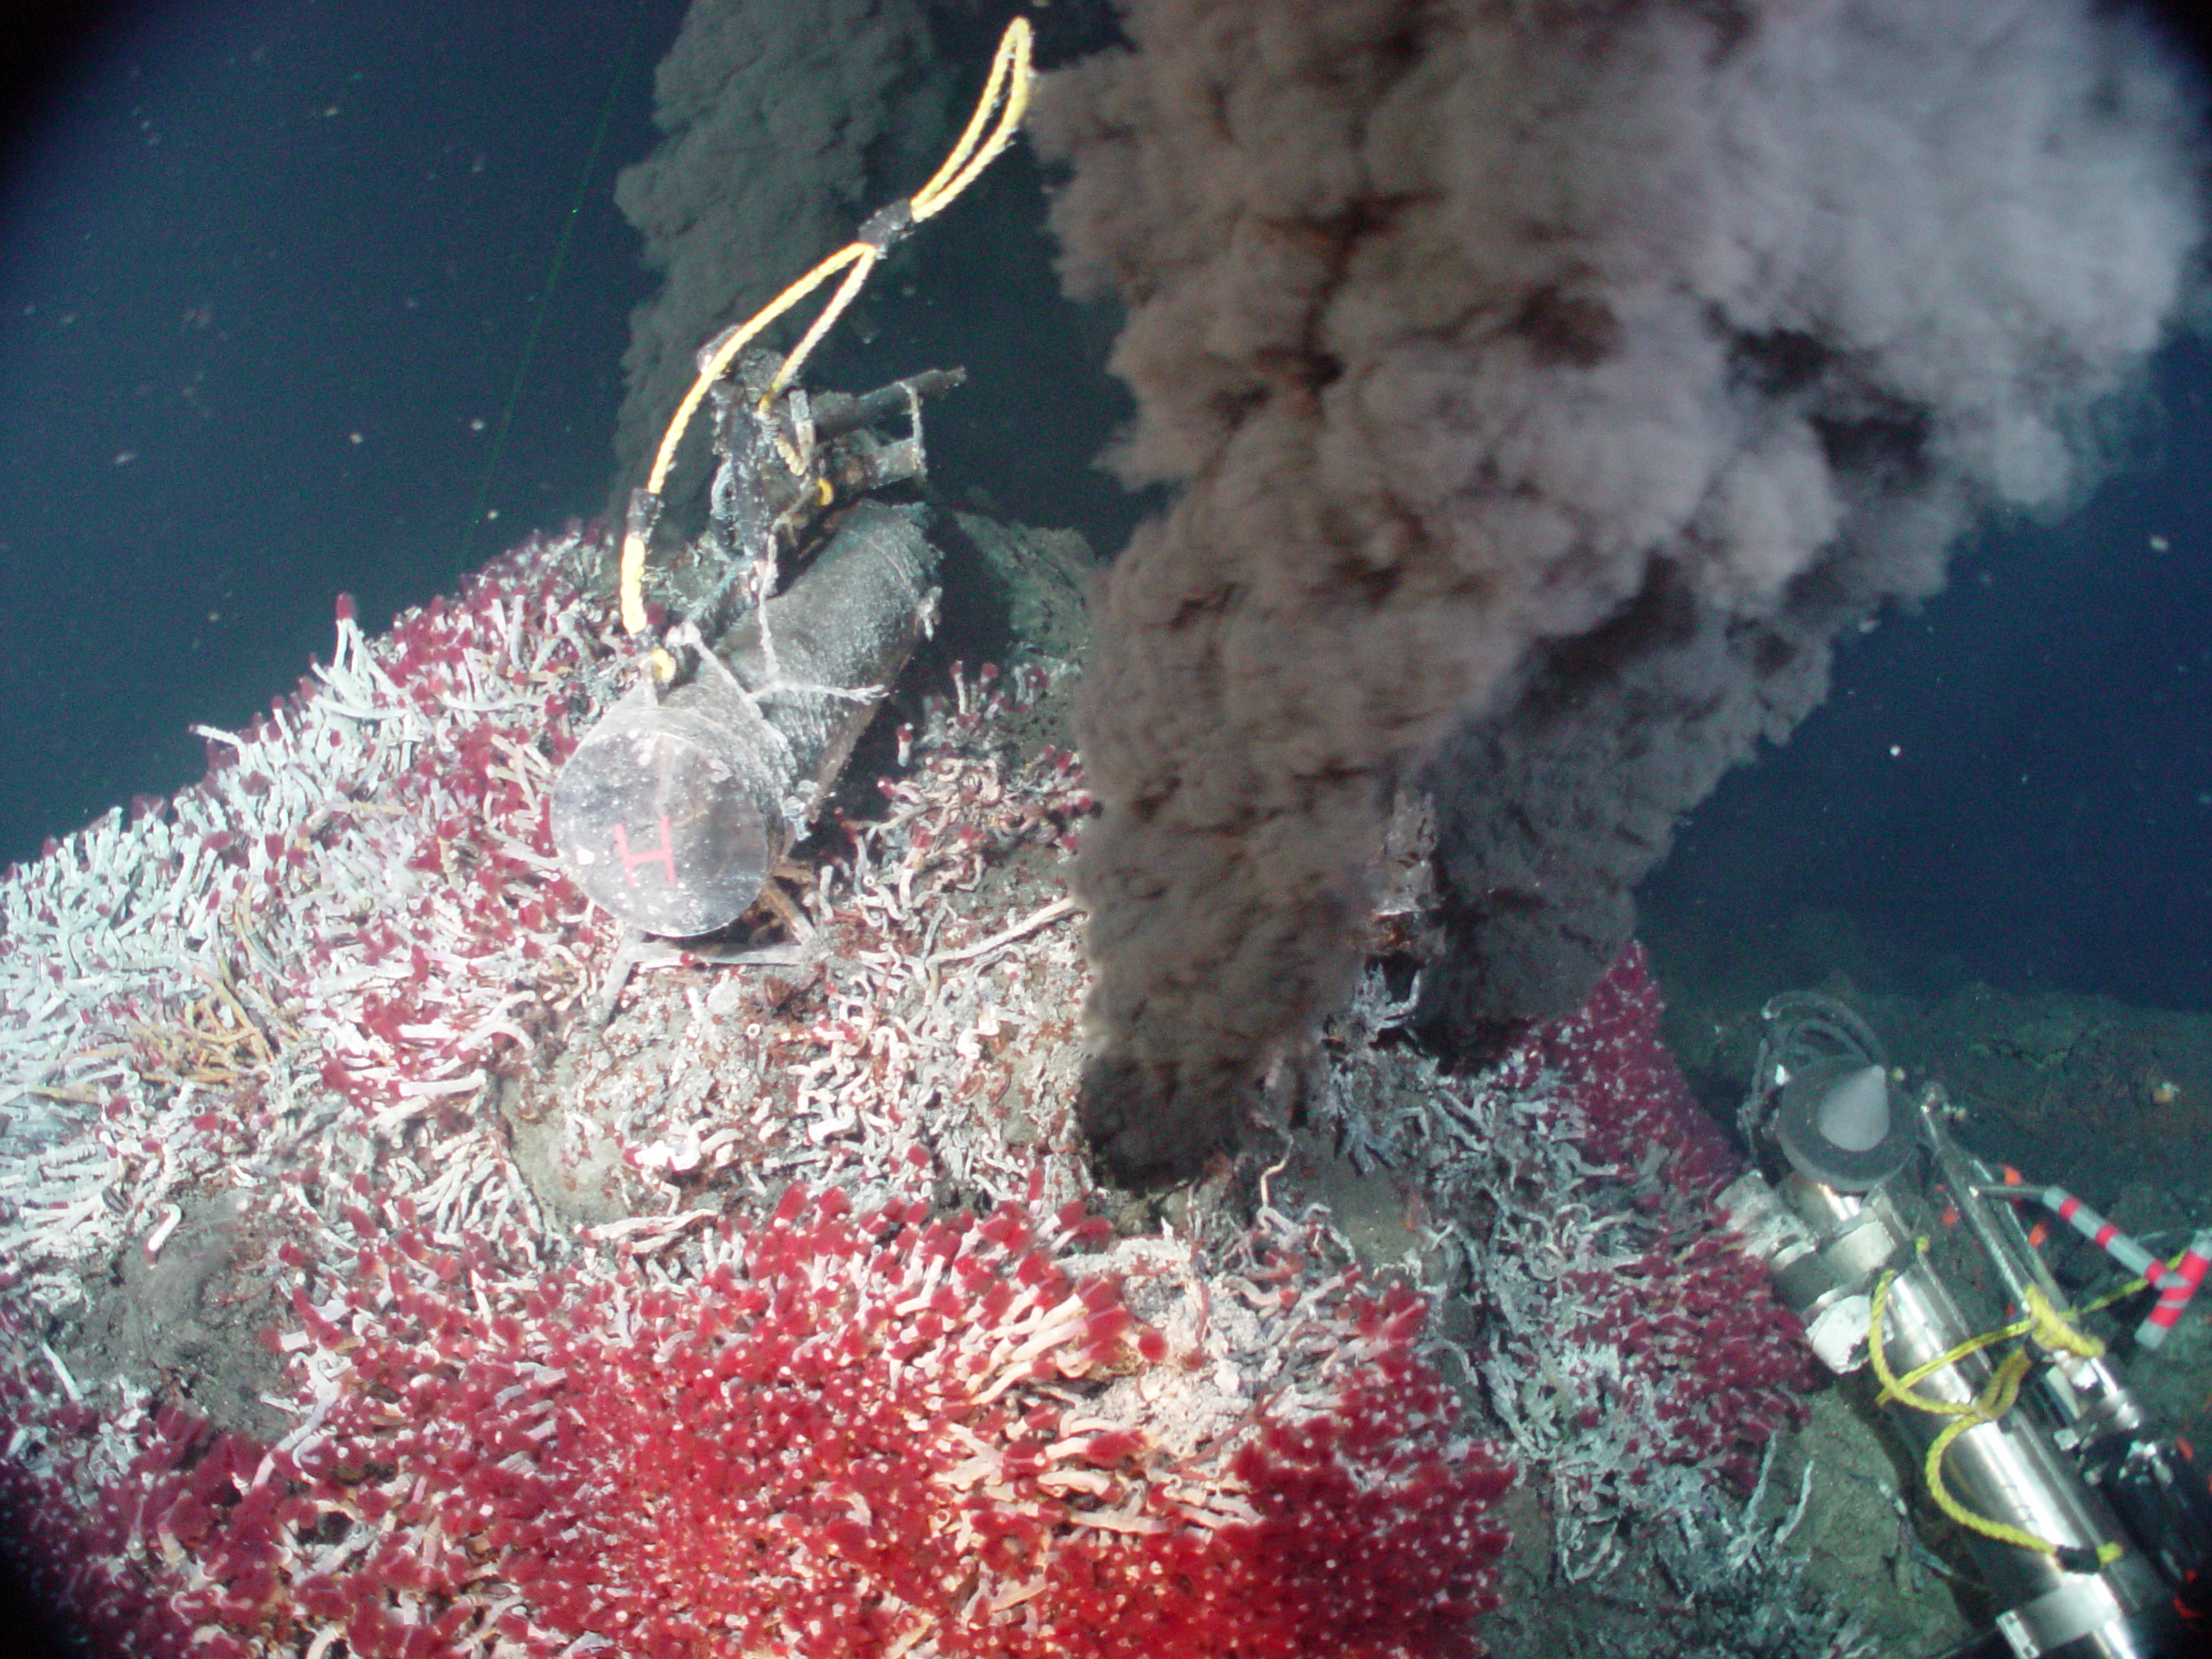 Hydrothermal vents spew out tasty morsels for local marine consumers